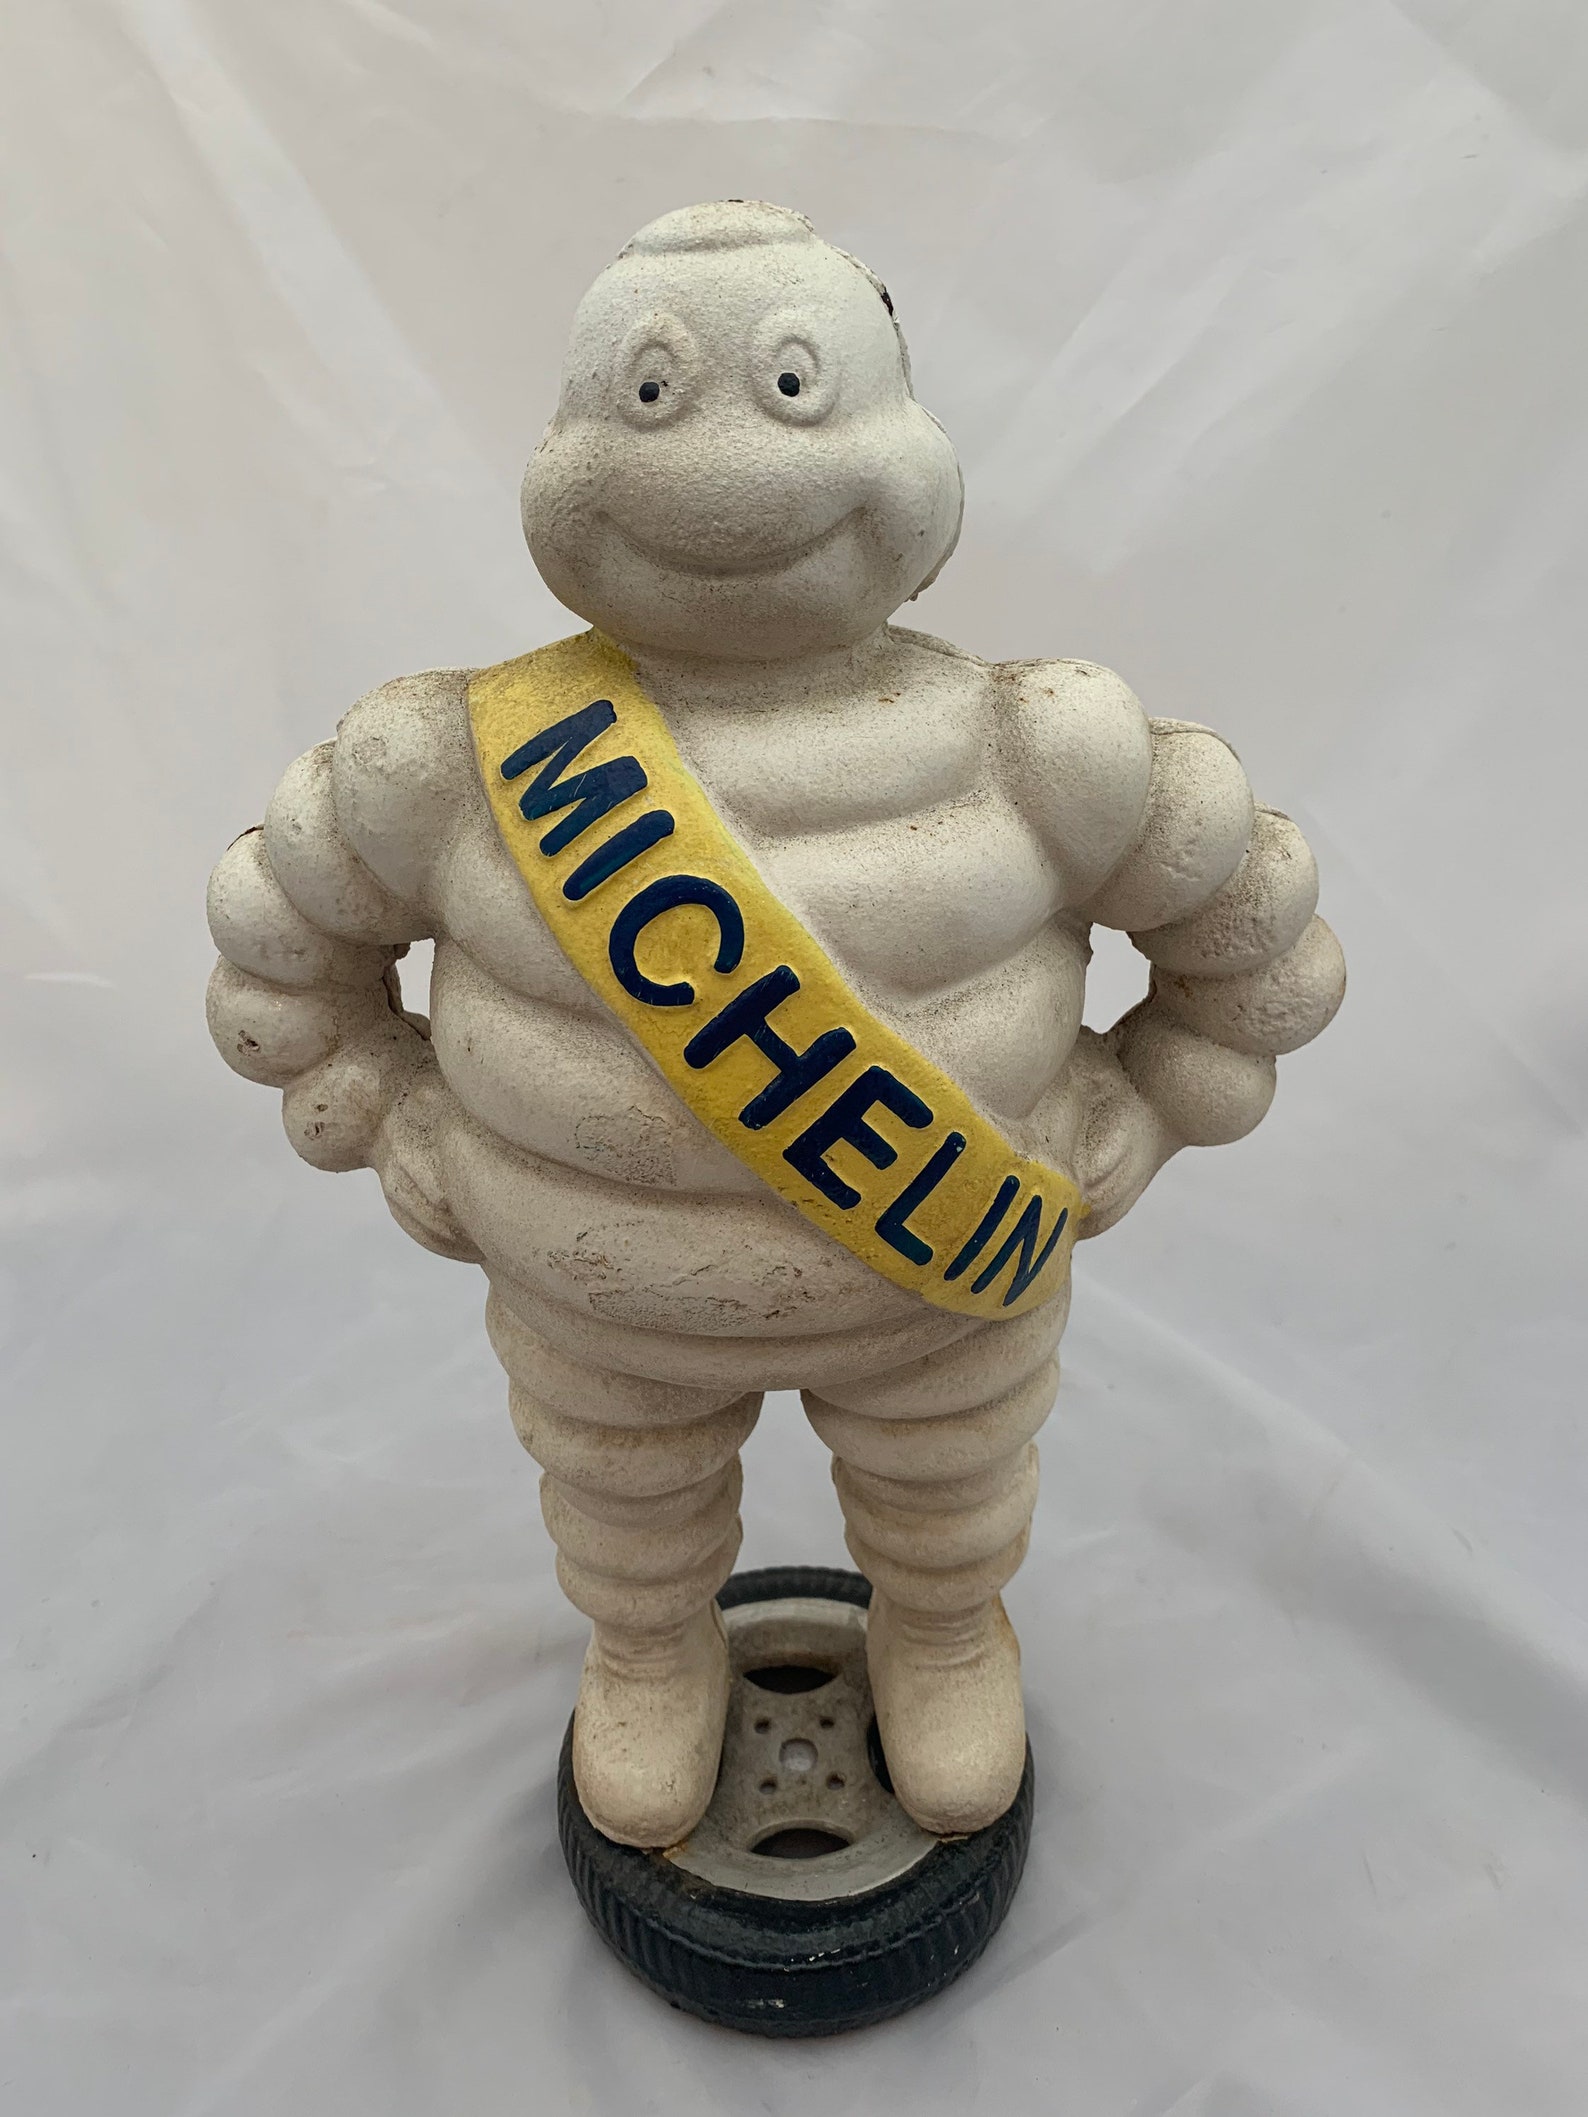 Vintage cast iron Michelin tyre man Detroit 1918 standing in | Etsy